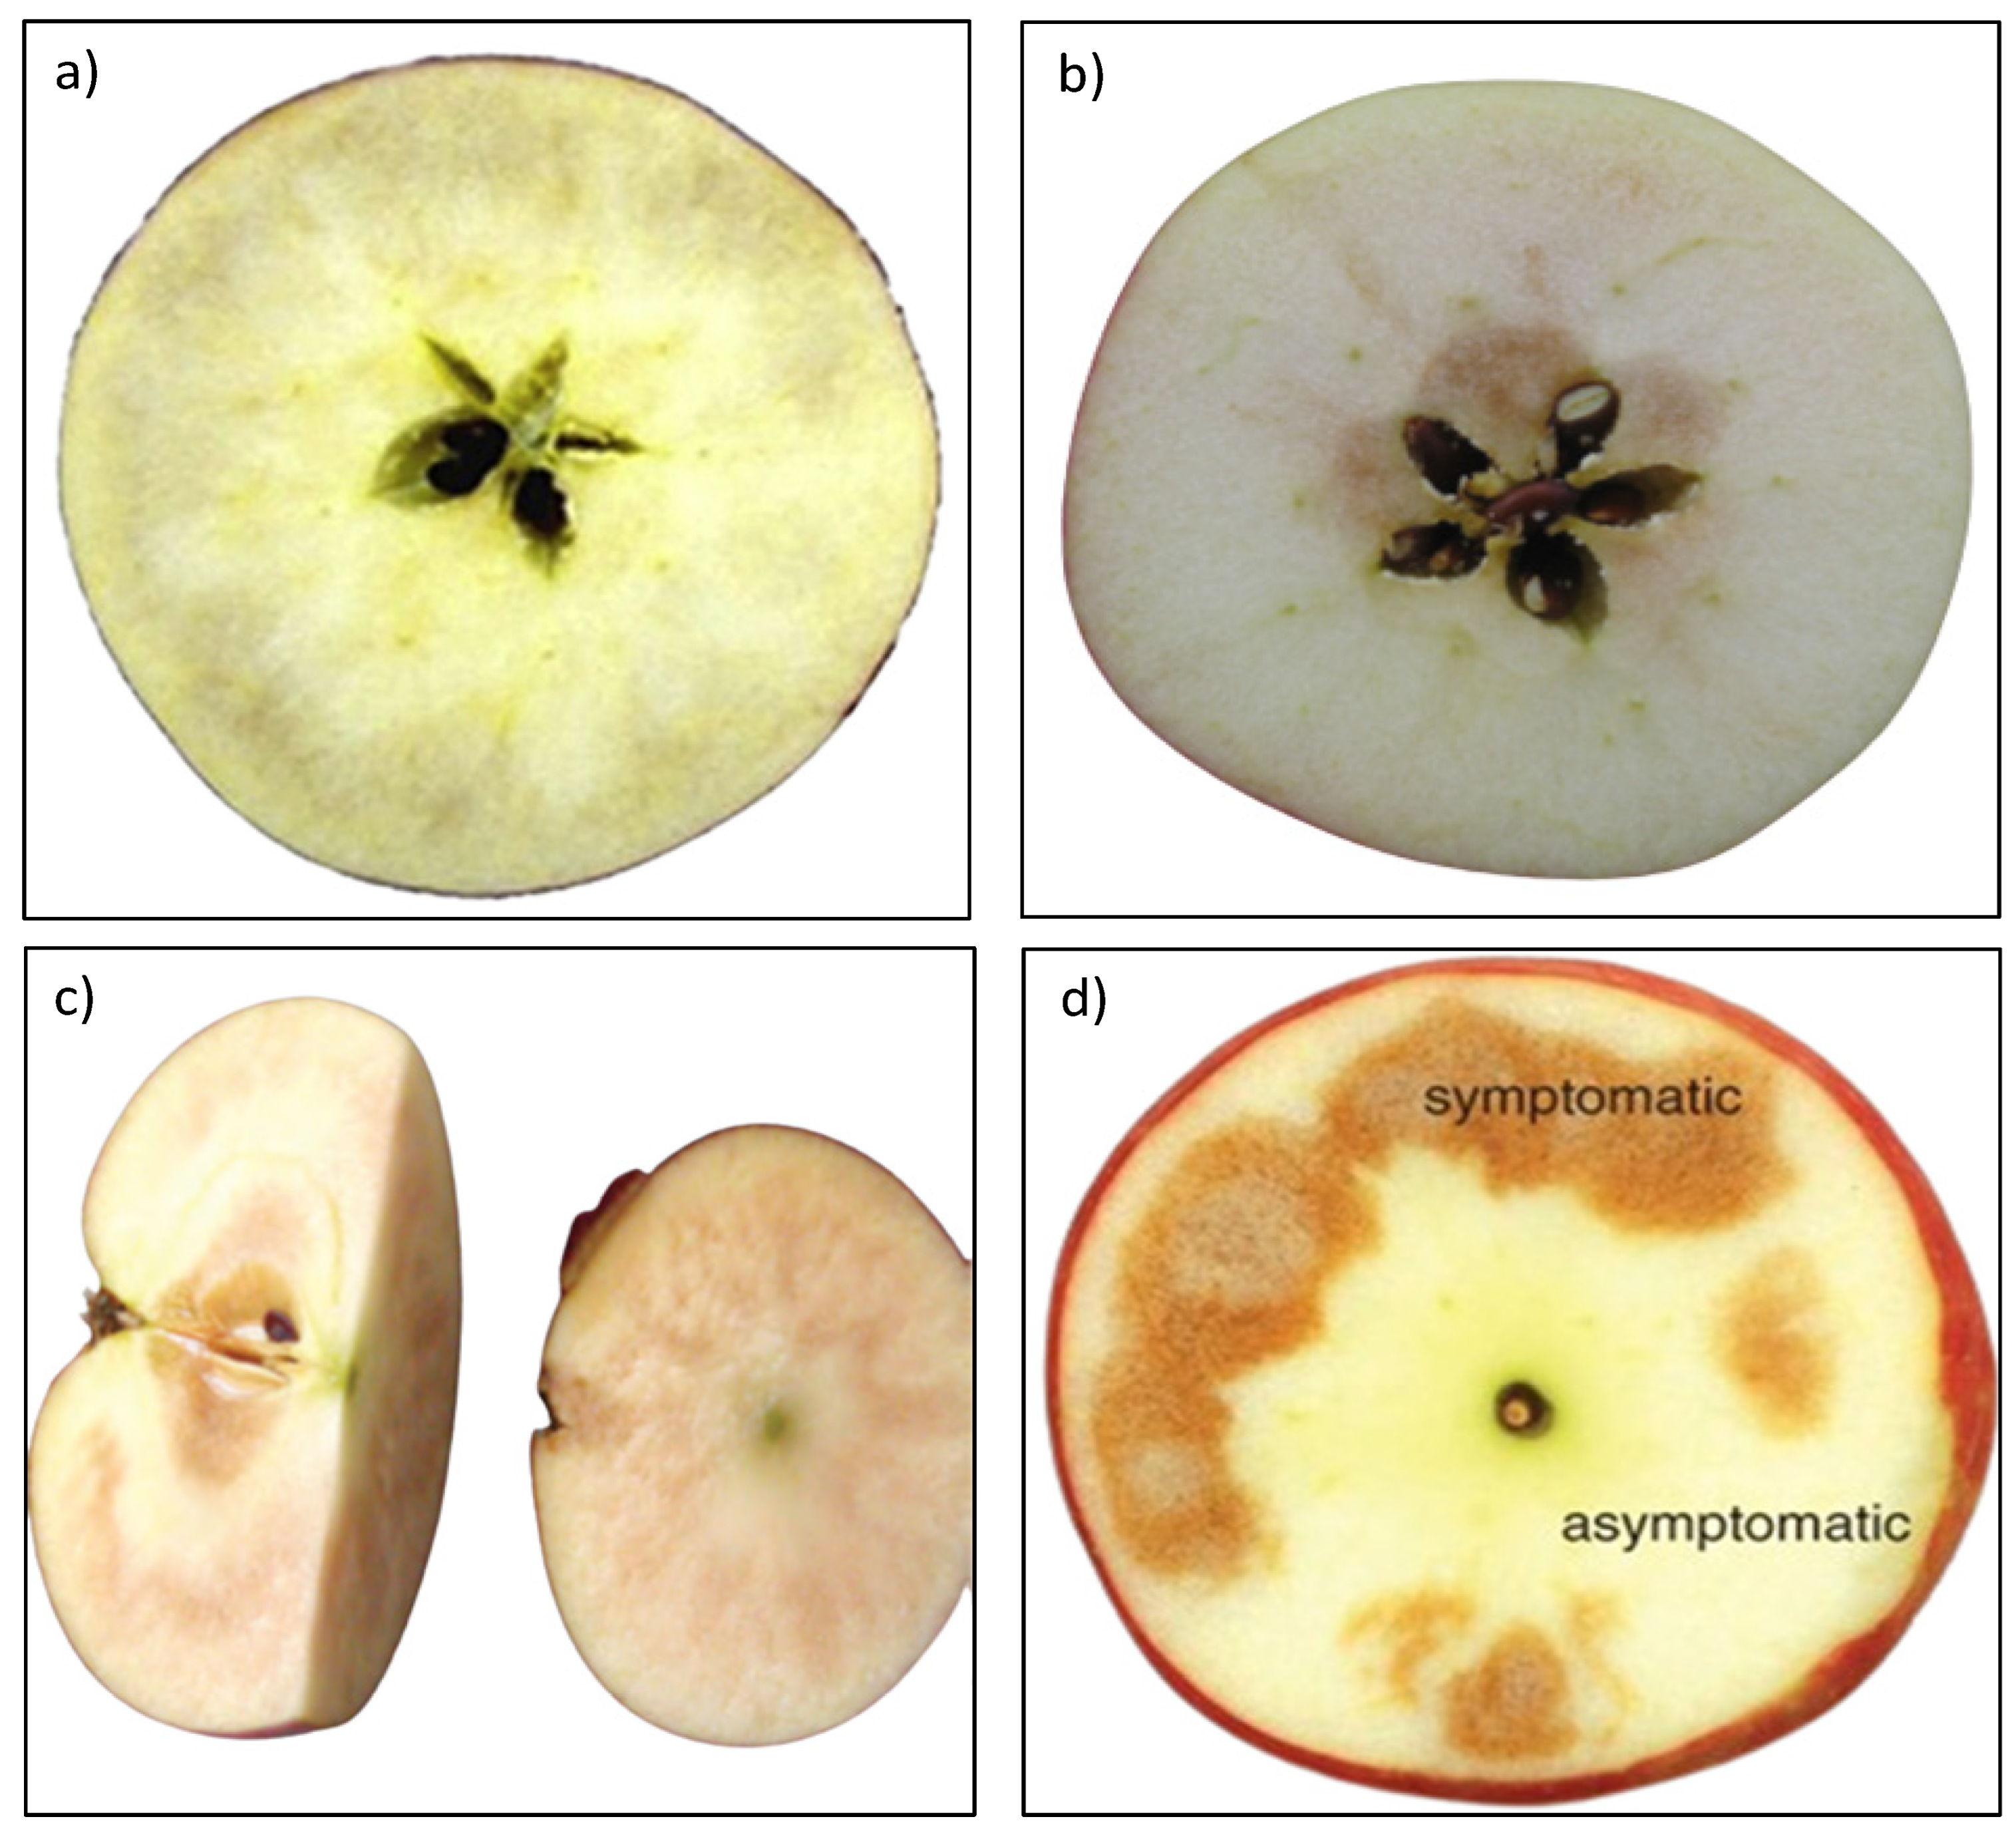 Fuji Apple Fruit Quality: Effect of Harvest Maturity and Storage  Temperatures